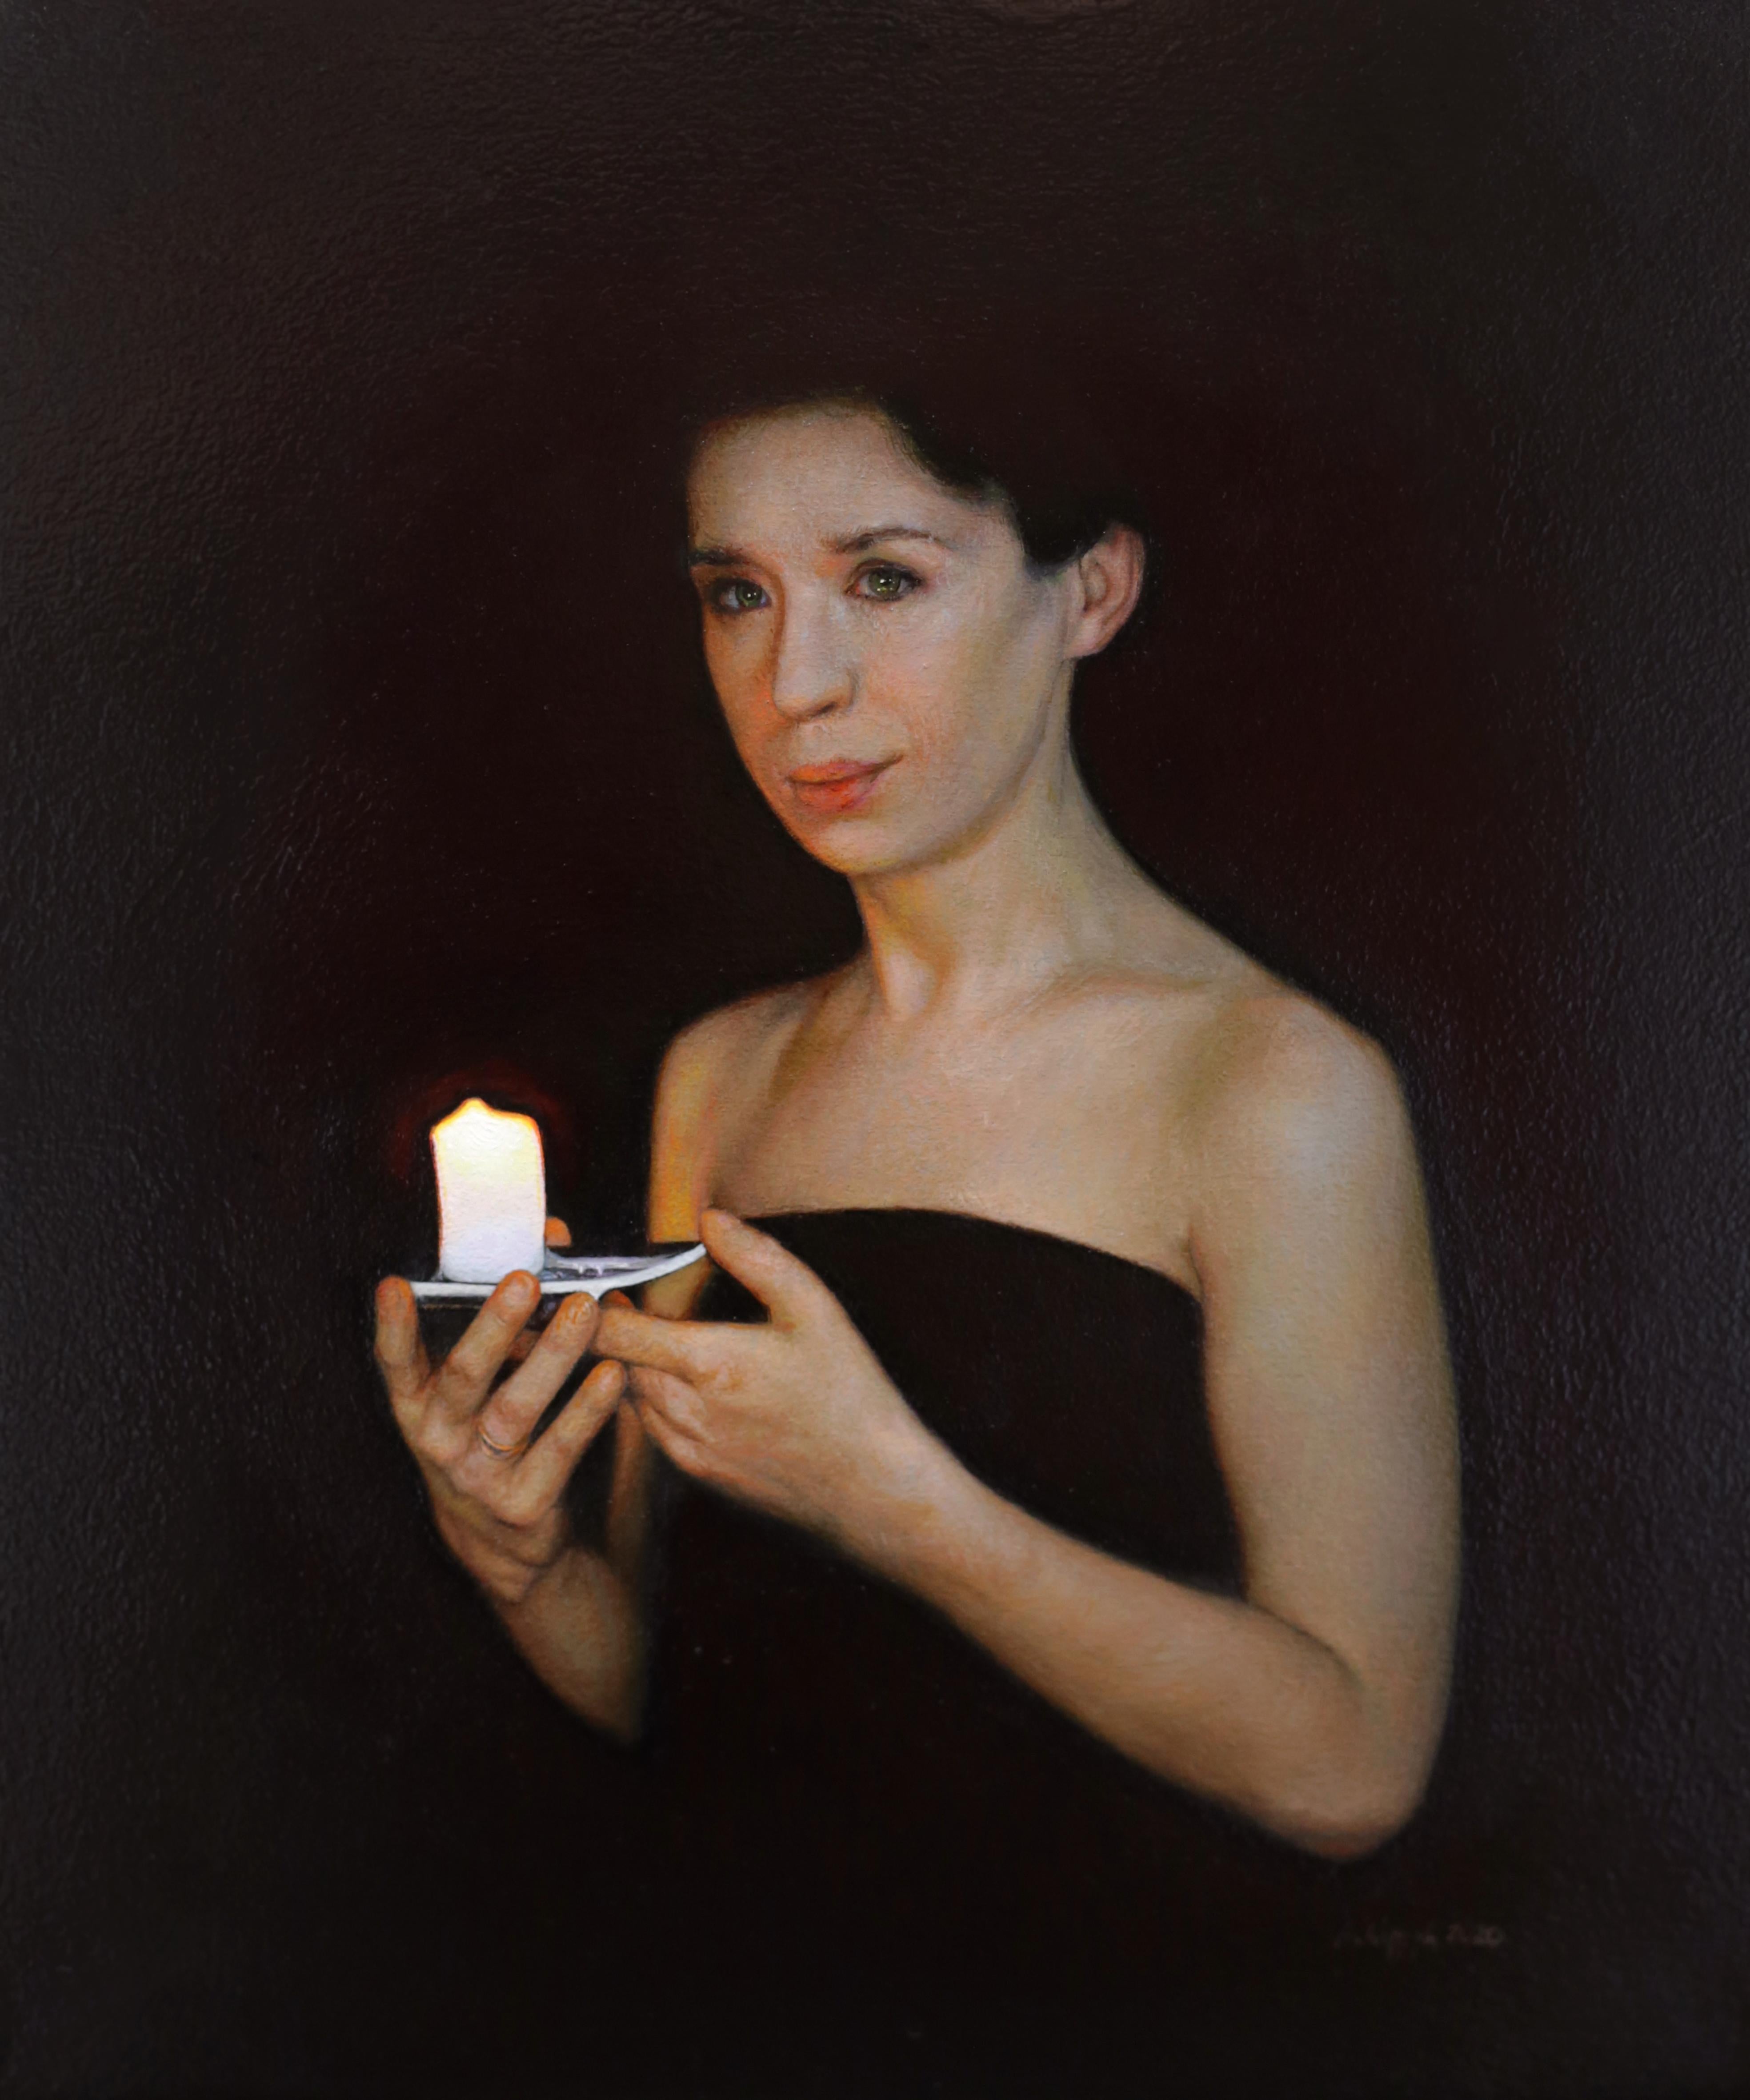 Anna Wypch Figurative Painting - "Own light" Oil Painting